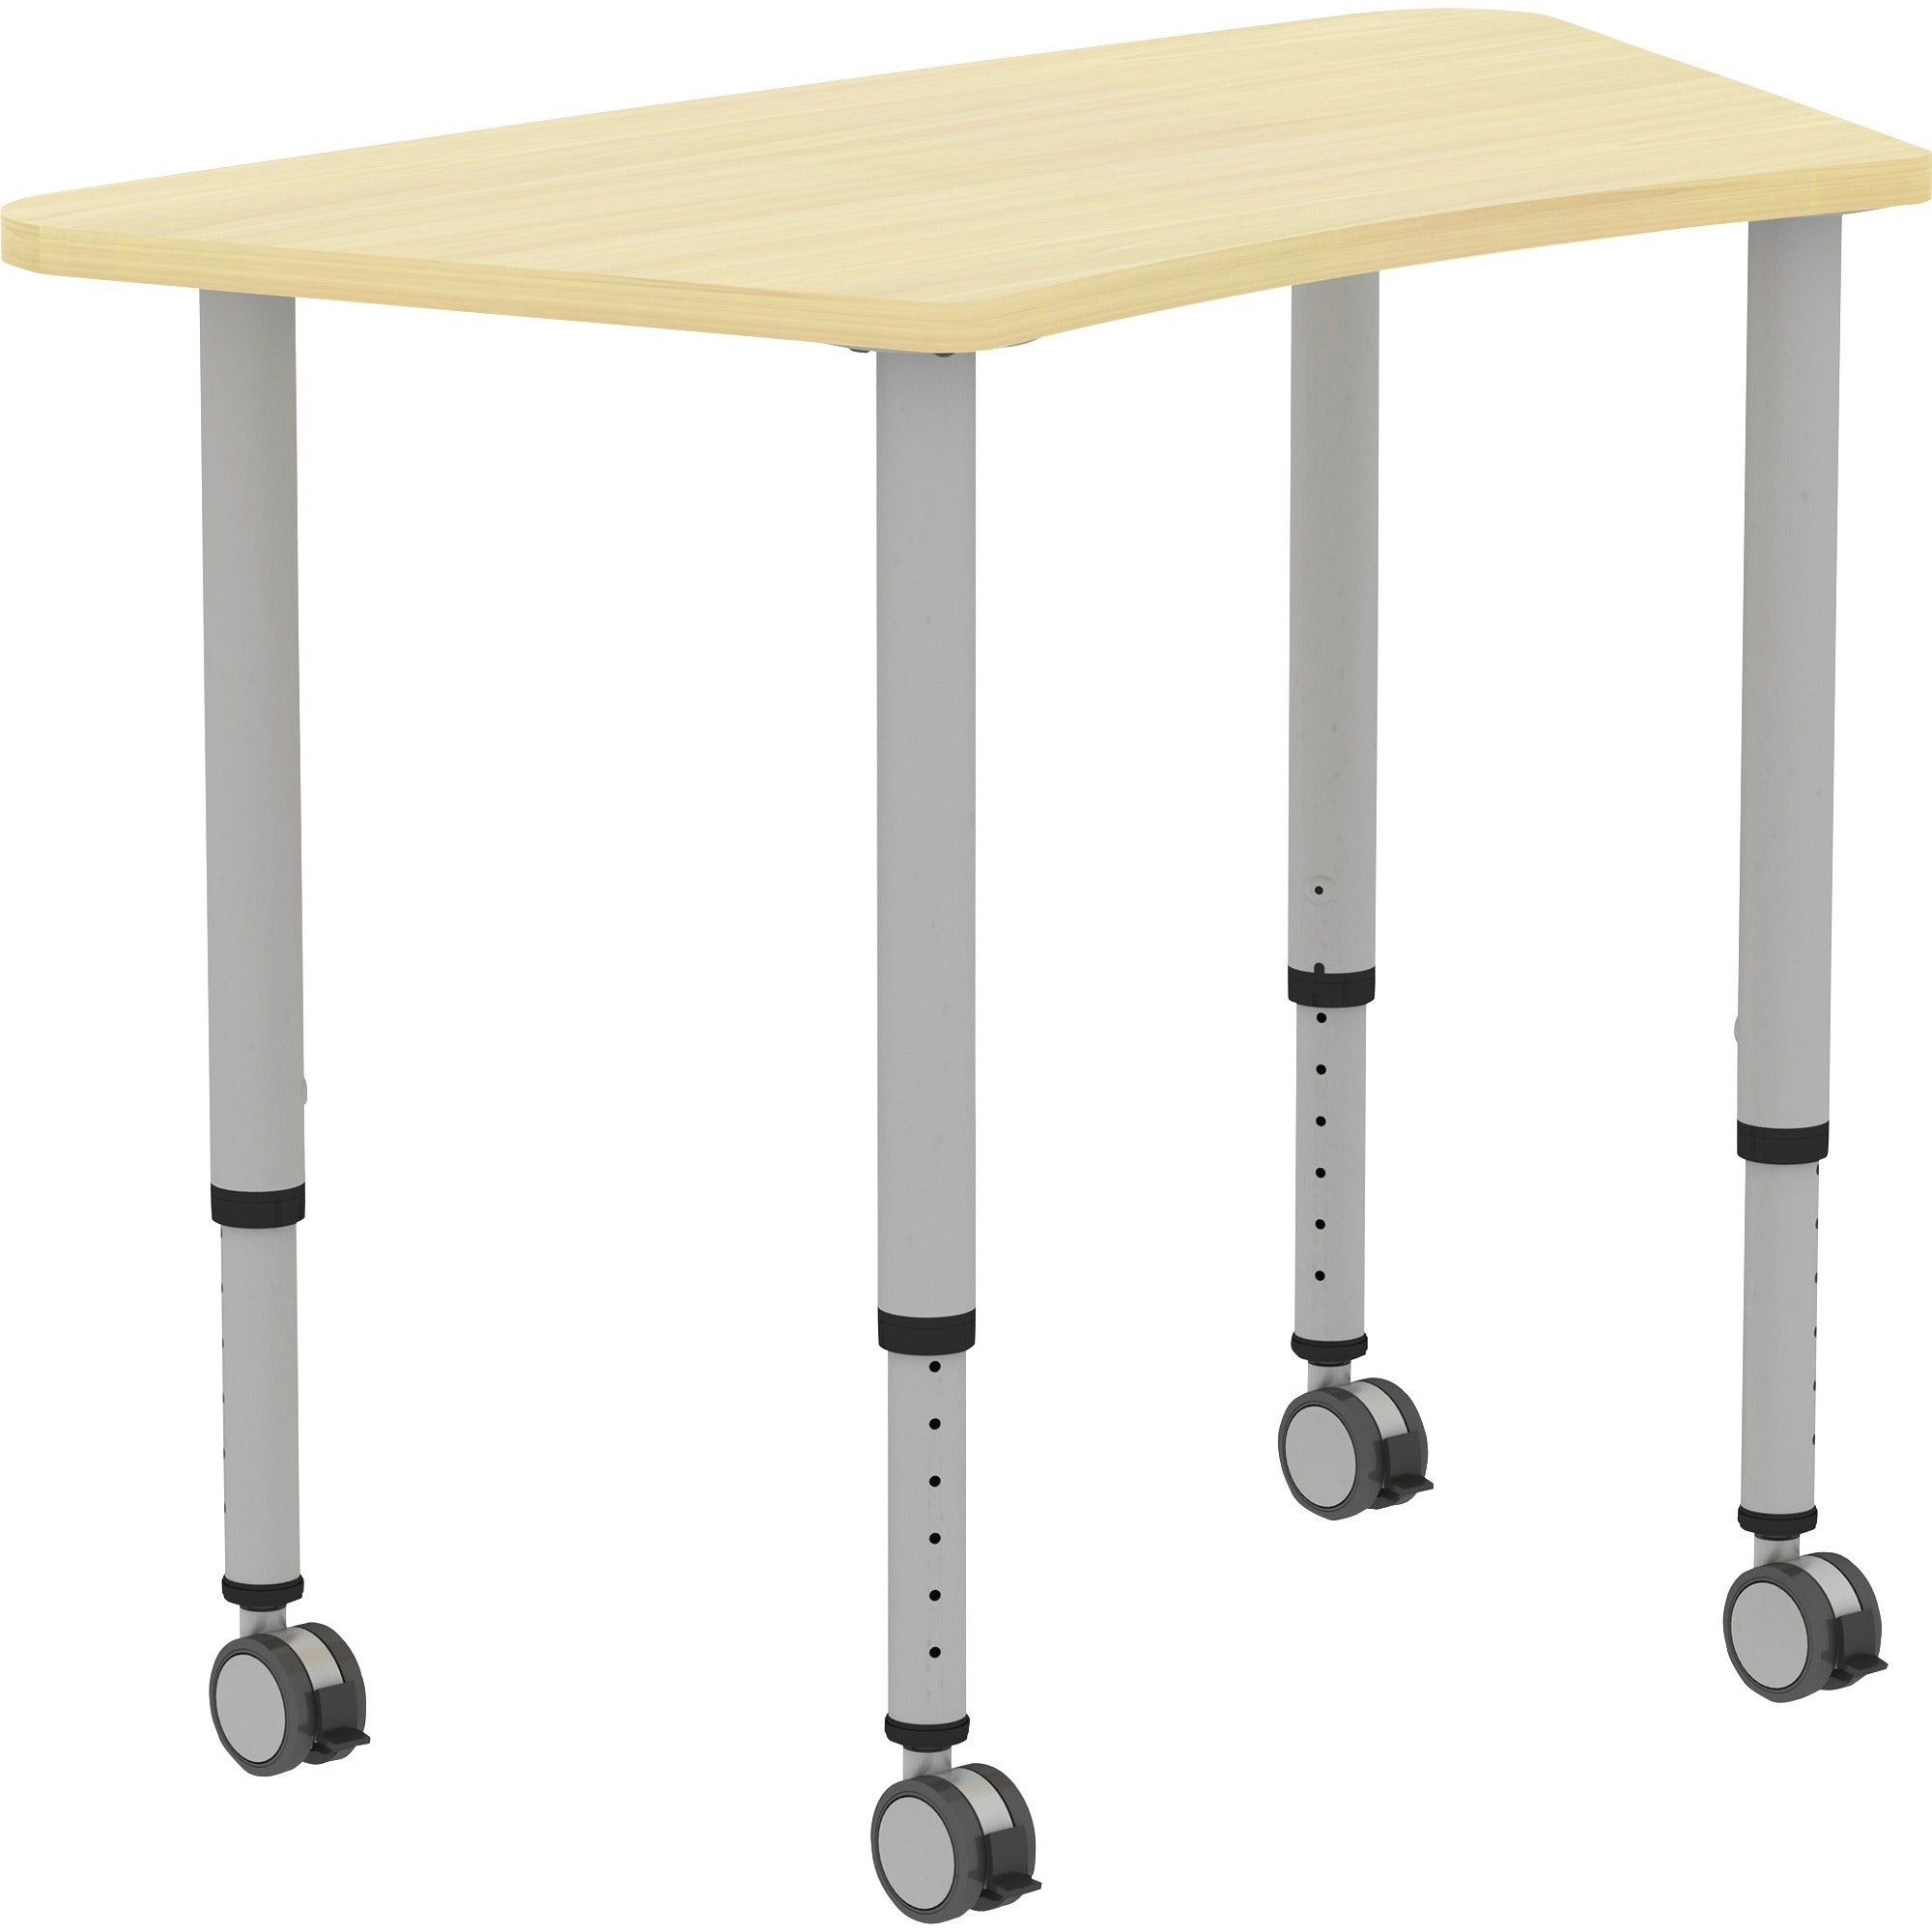 lorell-attune-height-adjustable-multipurpose-curved-table-for-table-toptrapezoid-top-adjustable-height-2662-to-3362-adjustment-x-60-table-top-width-x-2362-table-top-depth-3362-height-assembly-required-laminated-maple-laminat_llr69584 - 6